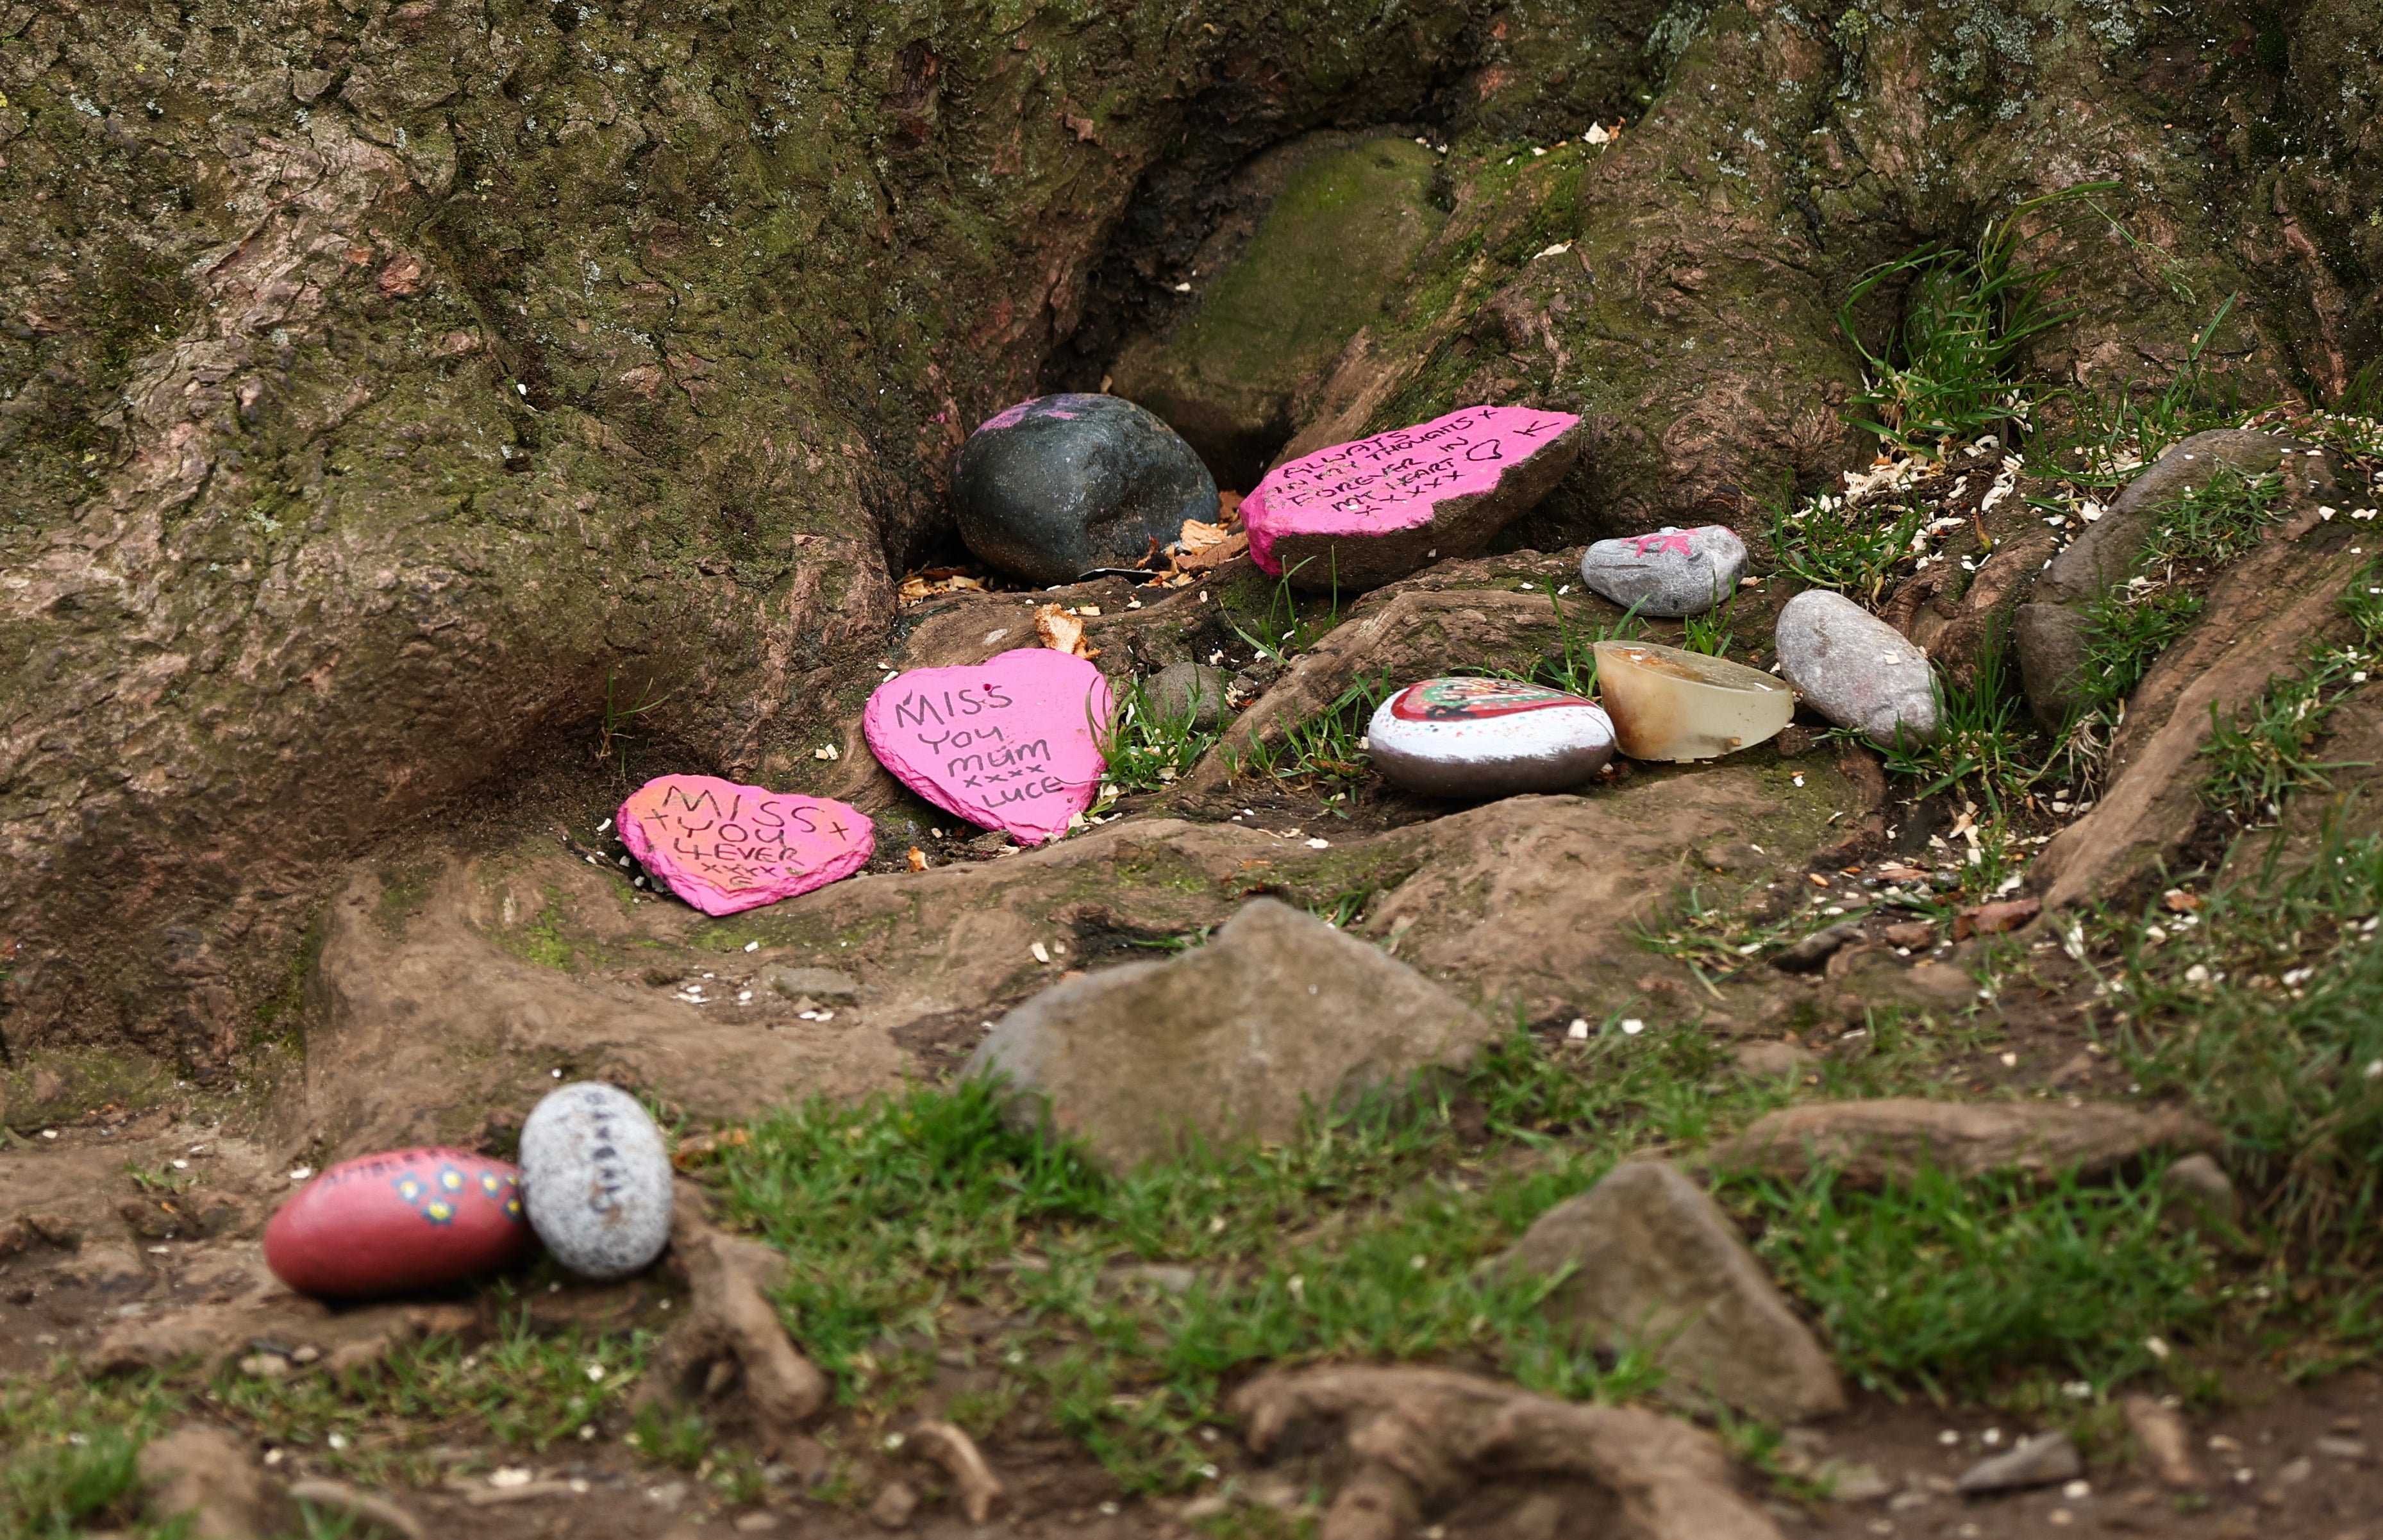 Messages left on stones beneath the remains of the tree